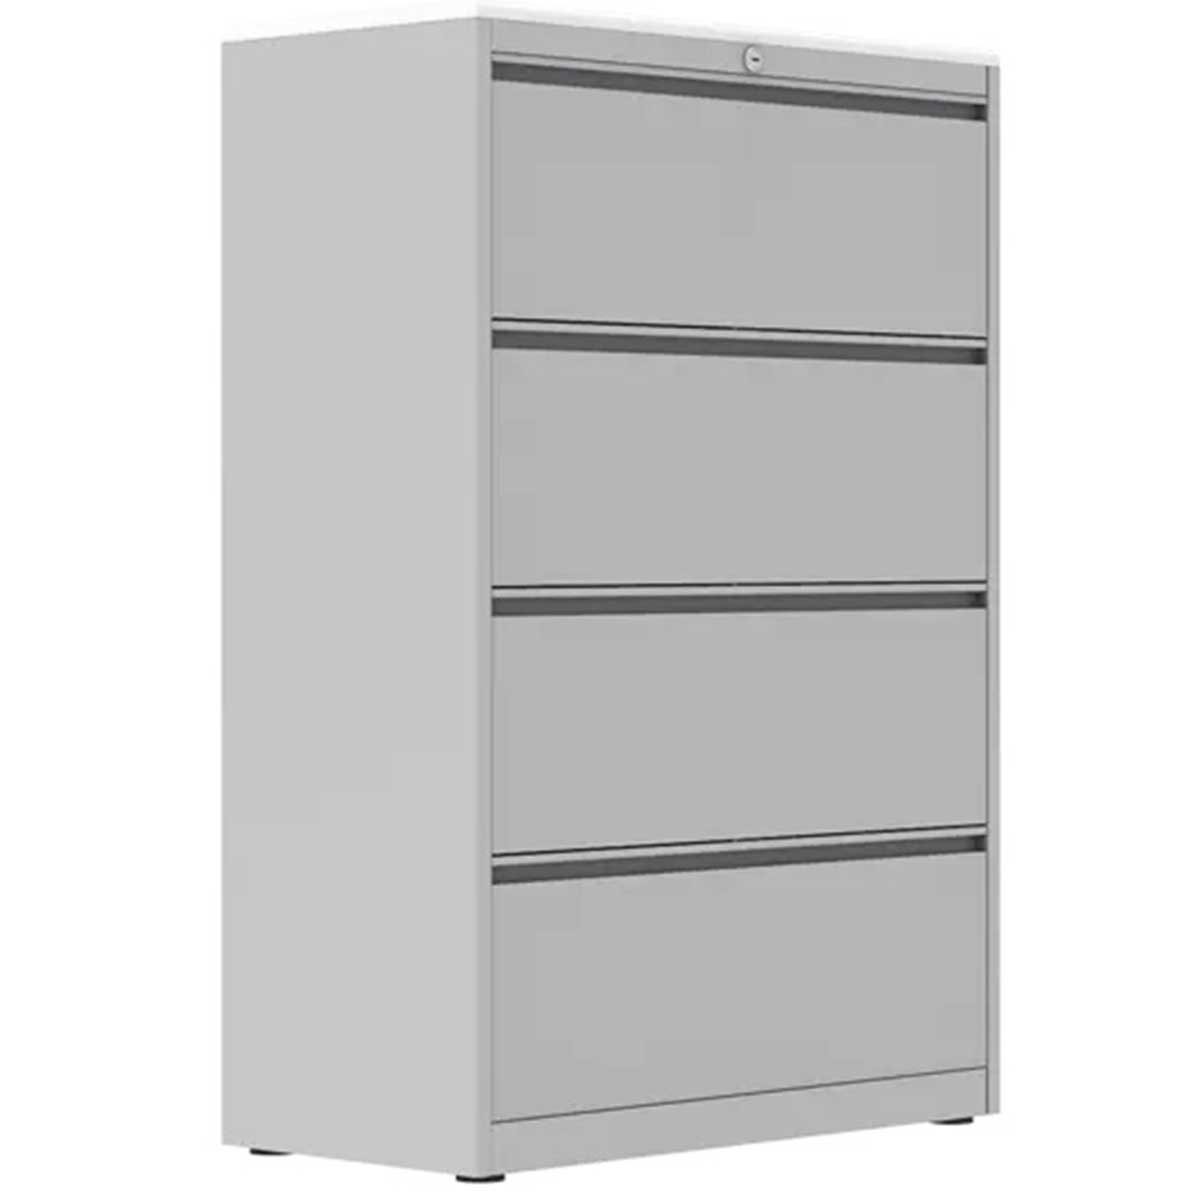 Fire Resistant File Cabinet Manufacturers, Suppliers in Tuglakabad